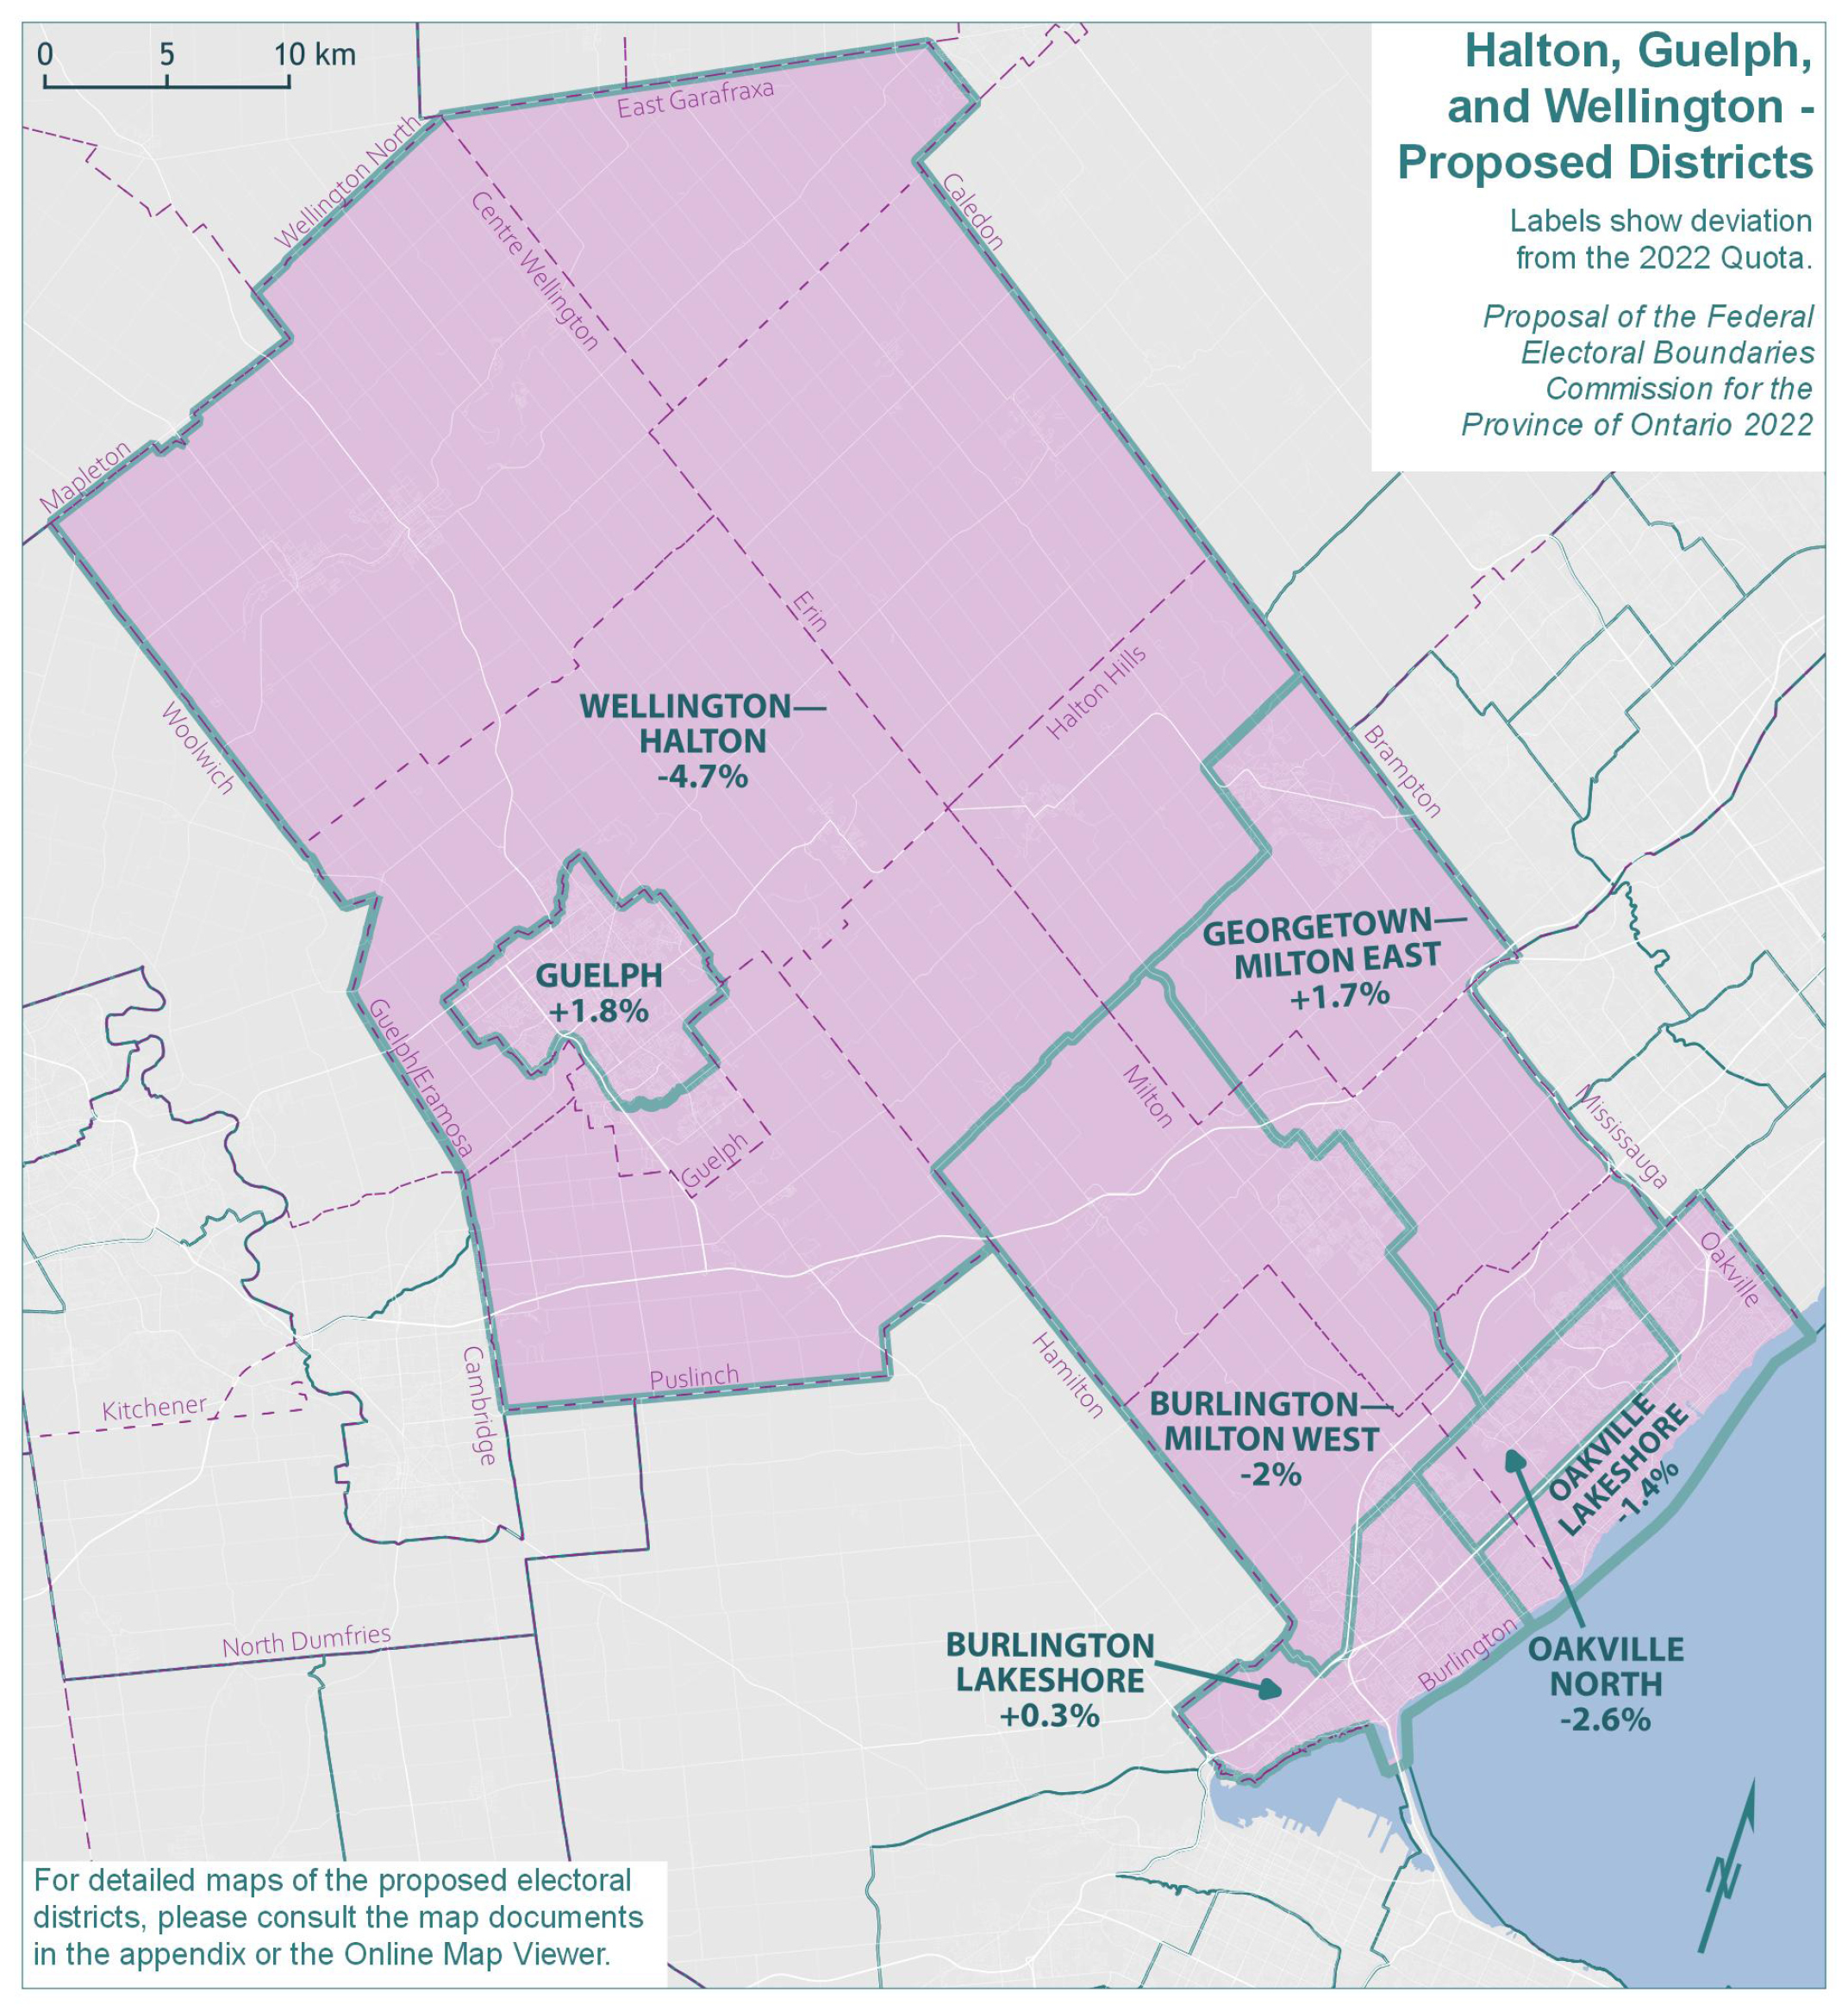 Halton, Guelph, and Wellington - Proposed Districts